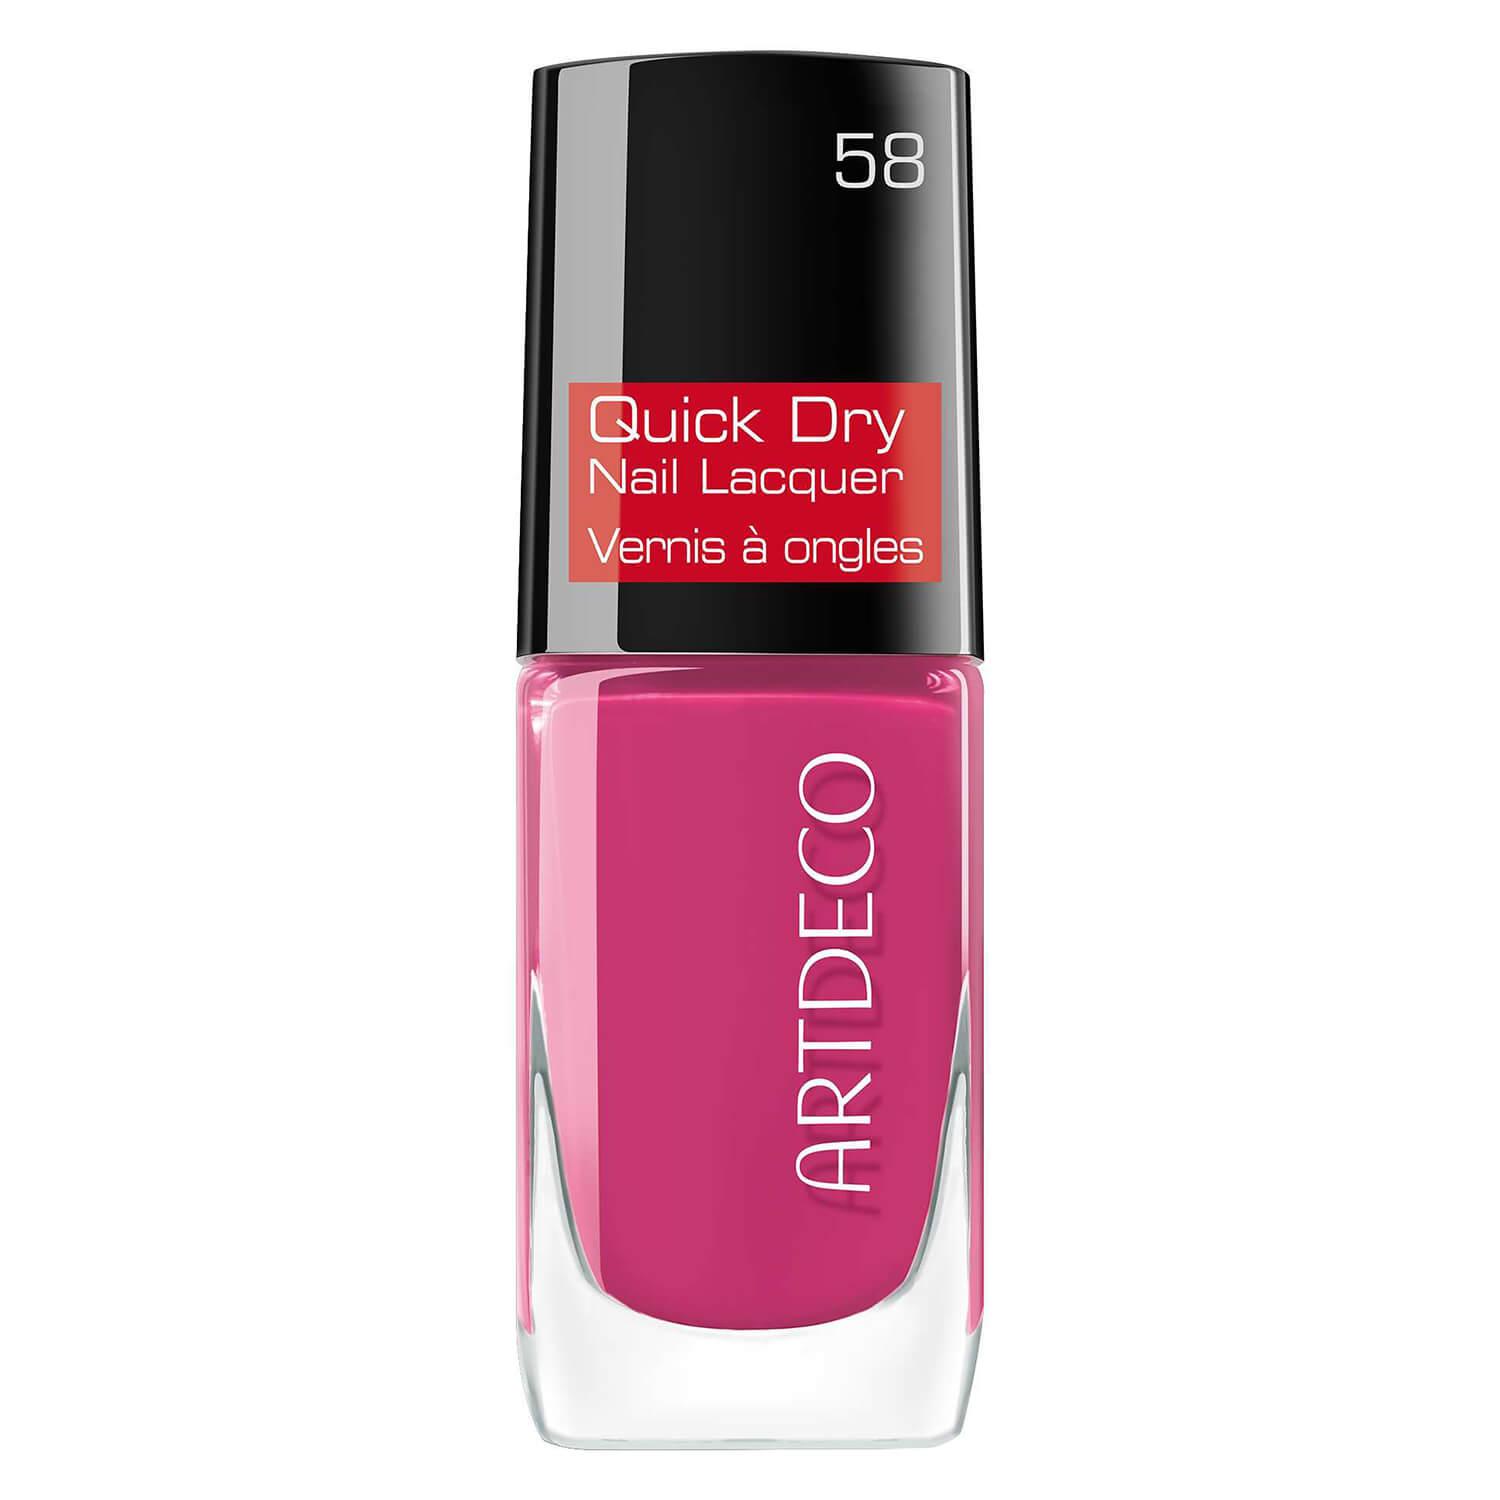 Quick Dry Nail Lacquer Orchid Blossom 58